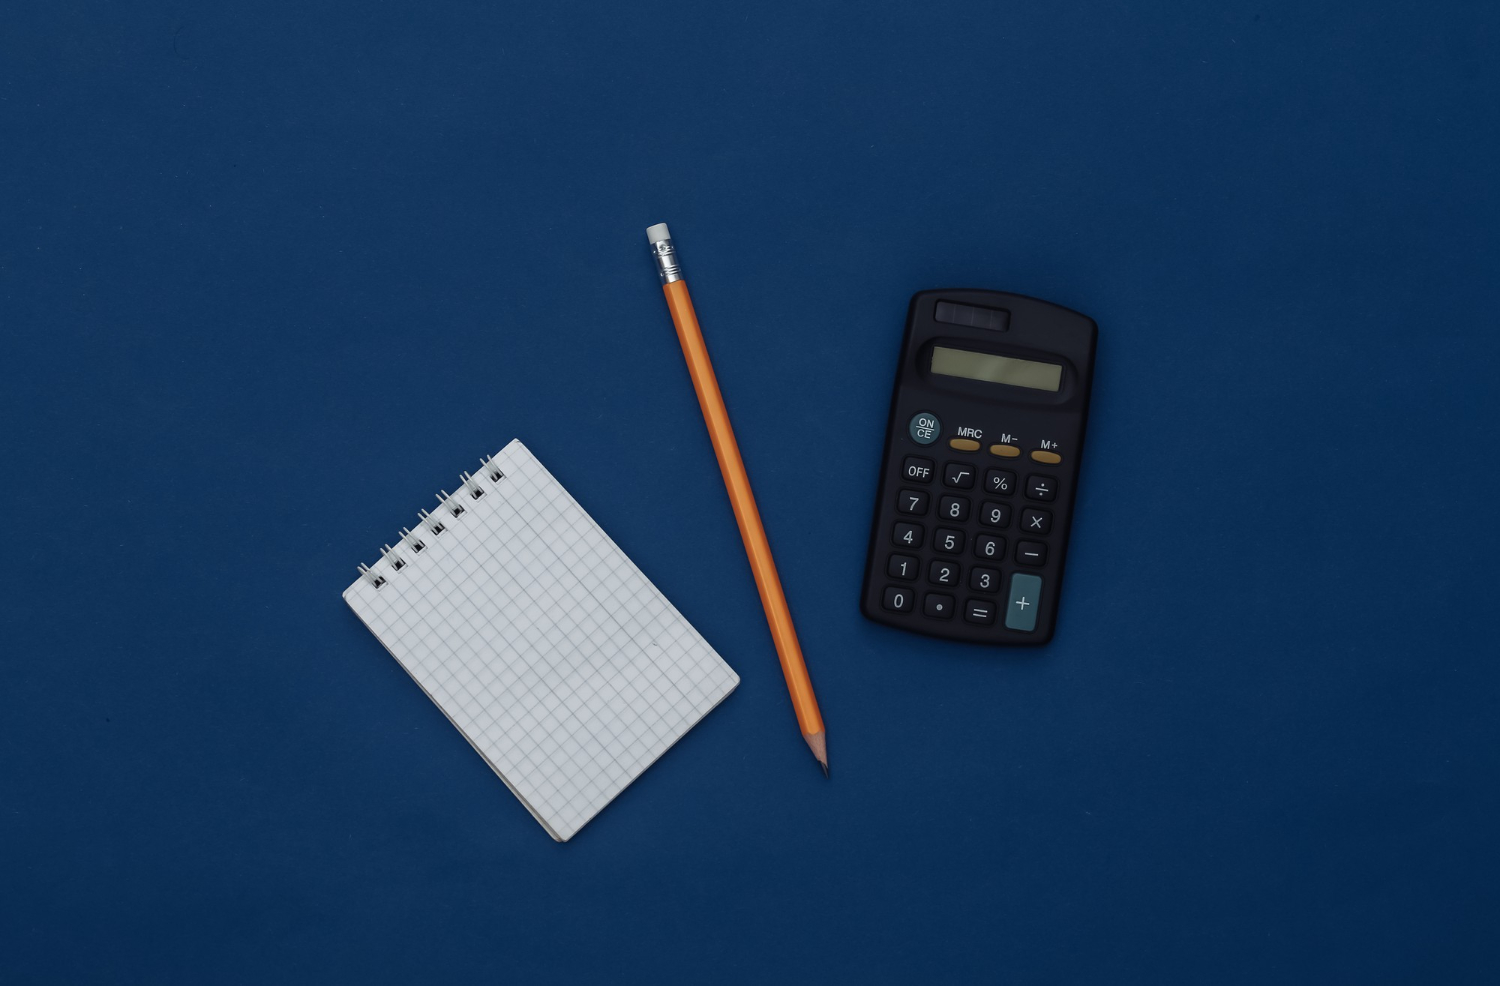 notepad with pencil and calculator gadgets on blue background